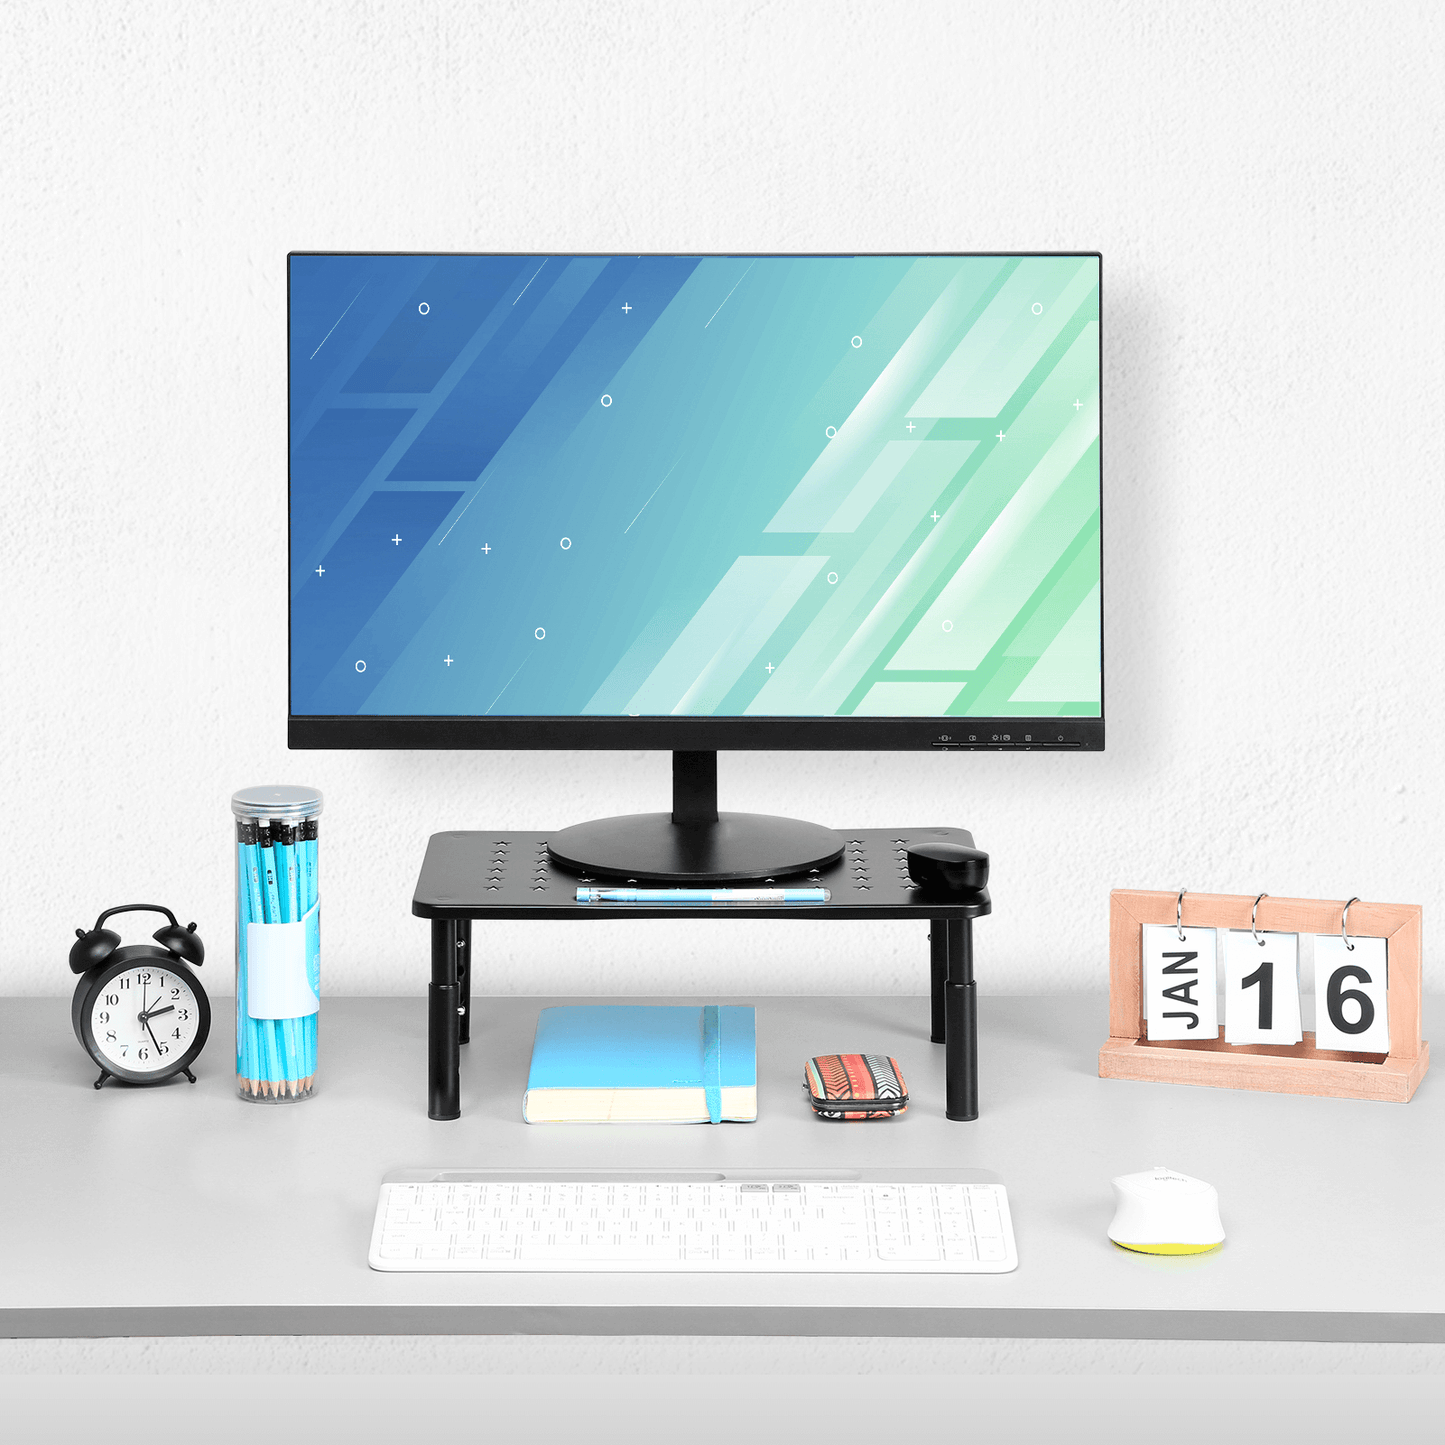 Zimilar stand for computer monitor